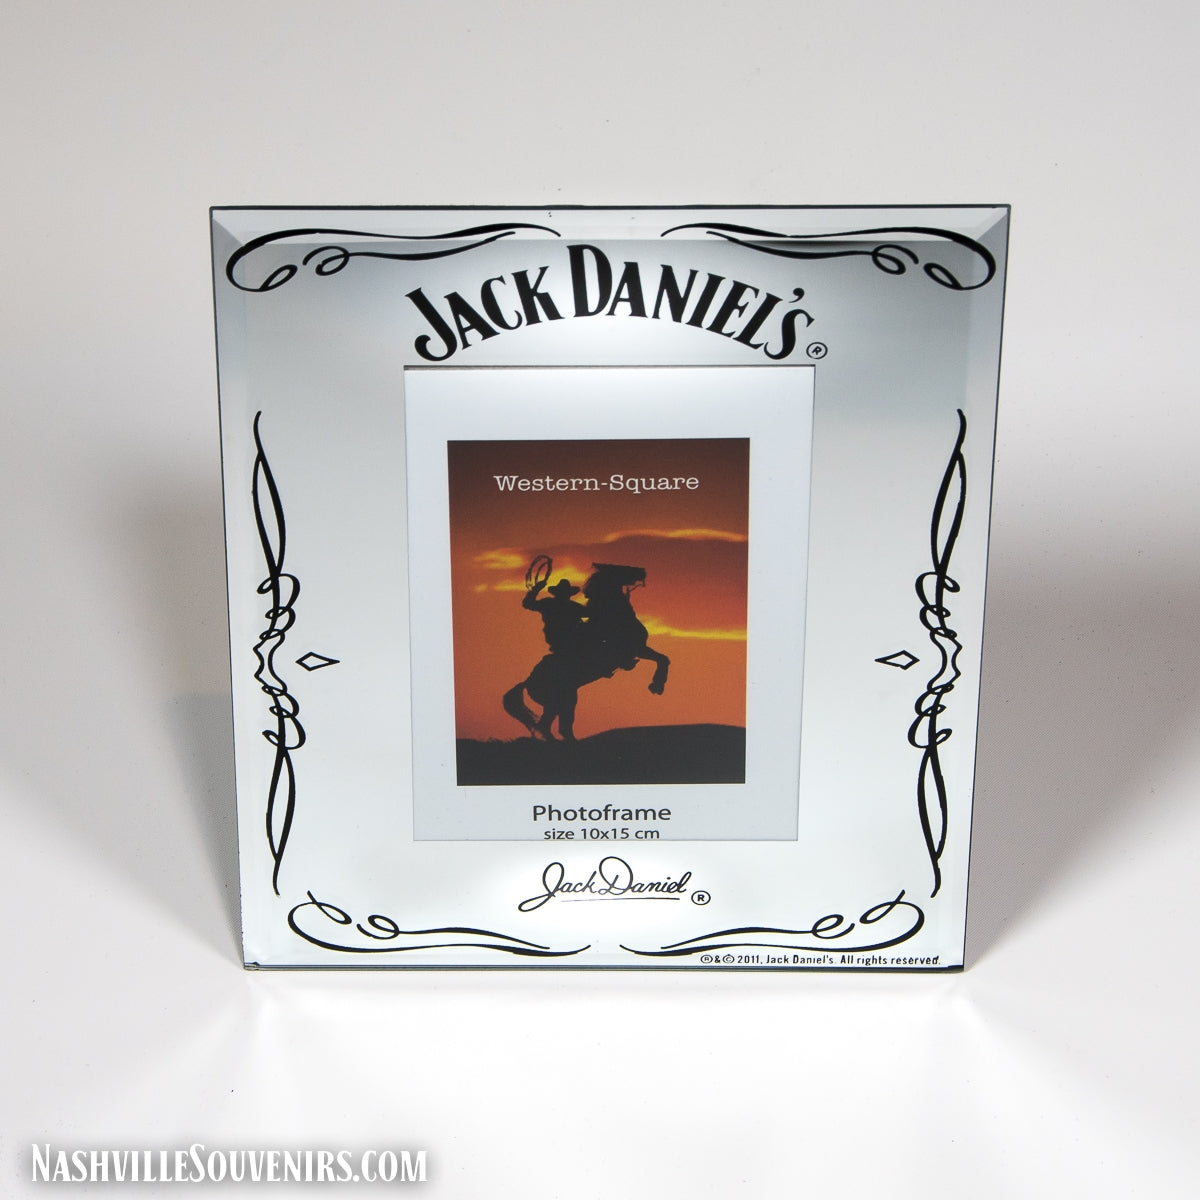 Officially licensed Jack Daniels Reverse Label Photo frame. FREE SHIPPING on all US orders over $75!